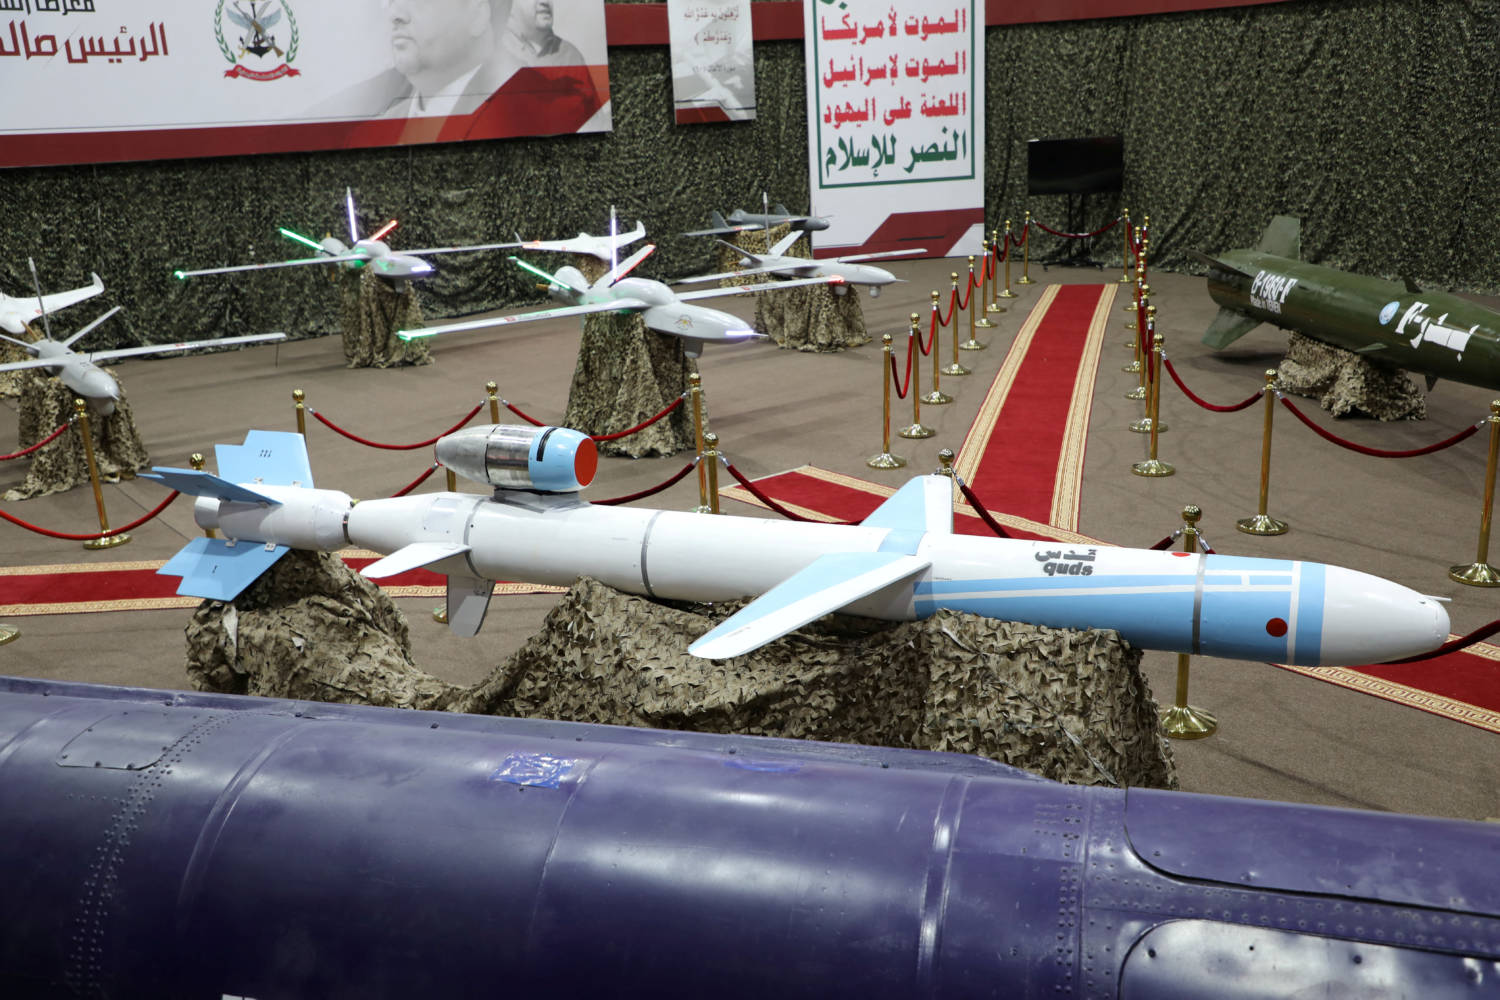 File Photo: Missiles And Drone Aircrafts Are Seen On Display At An Exhibition At An Unidentified Location In Yemen In This Undated Handout Photo Released By The Houthi Media Office